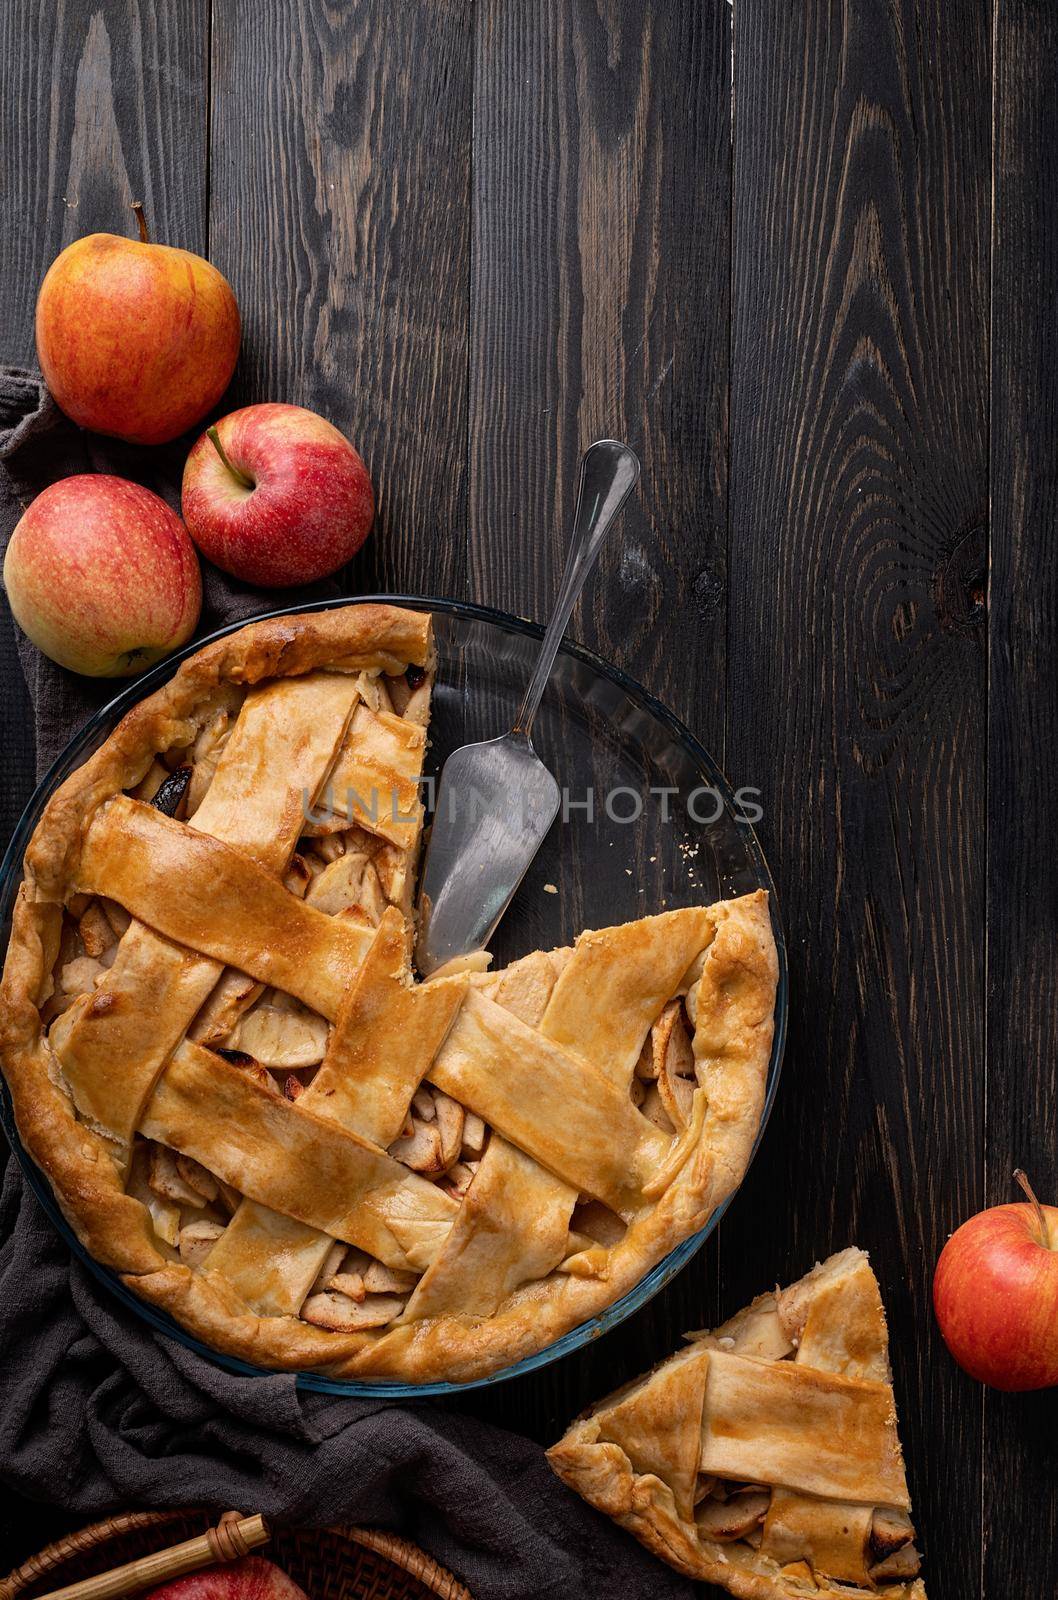 Autumn foods. Top view of homemade apple pie on dark wooden table, decorated with apples, sugar and tablecloth